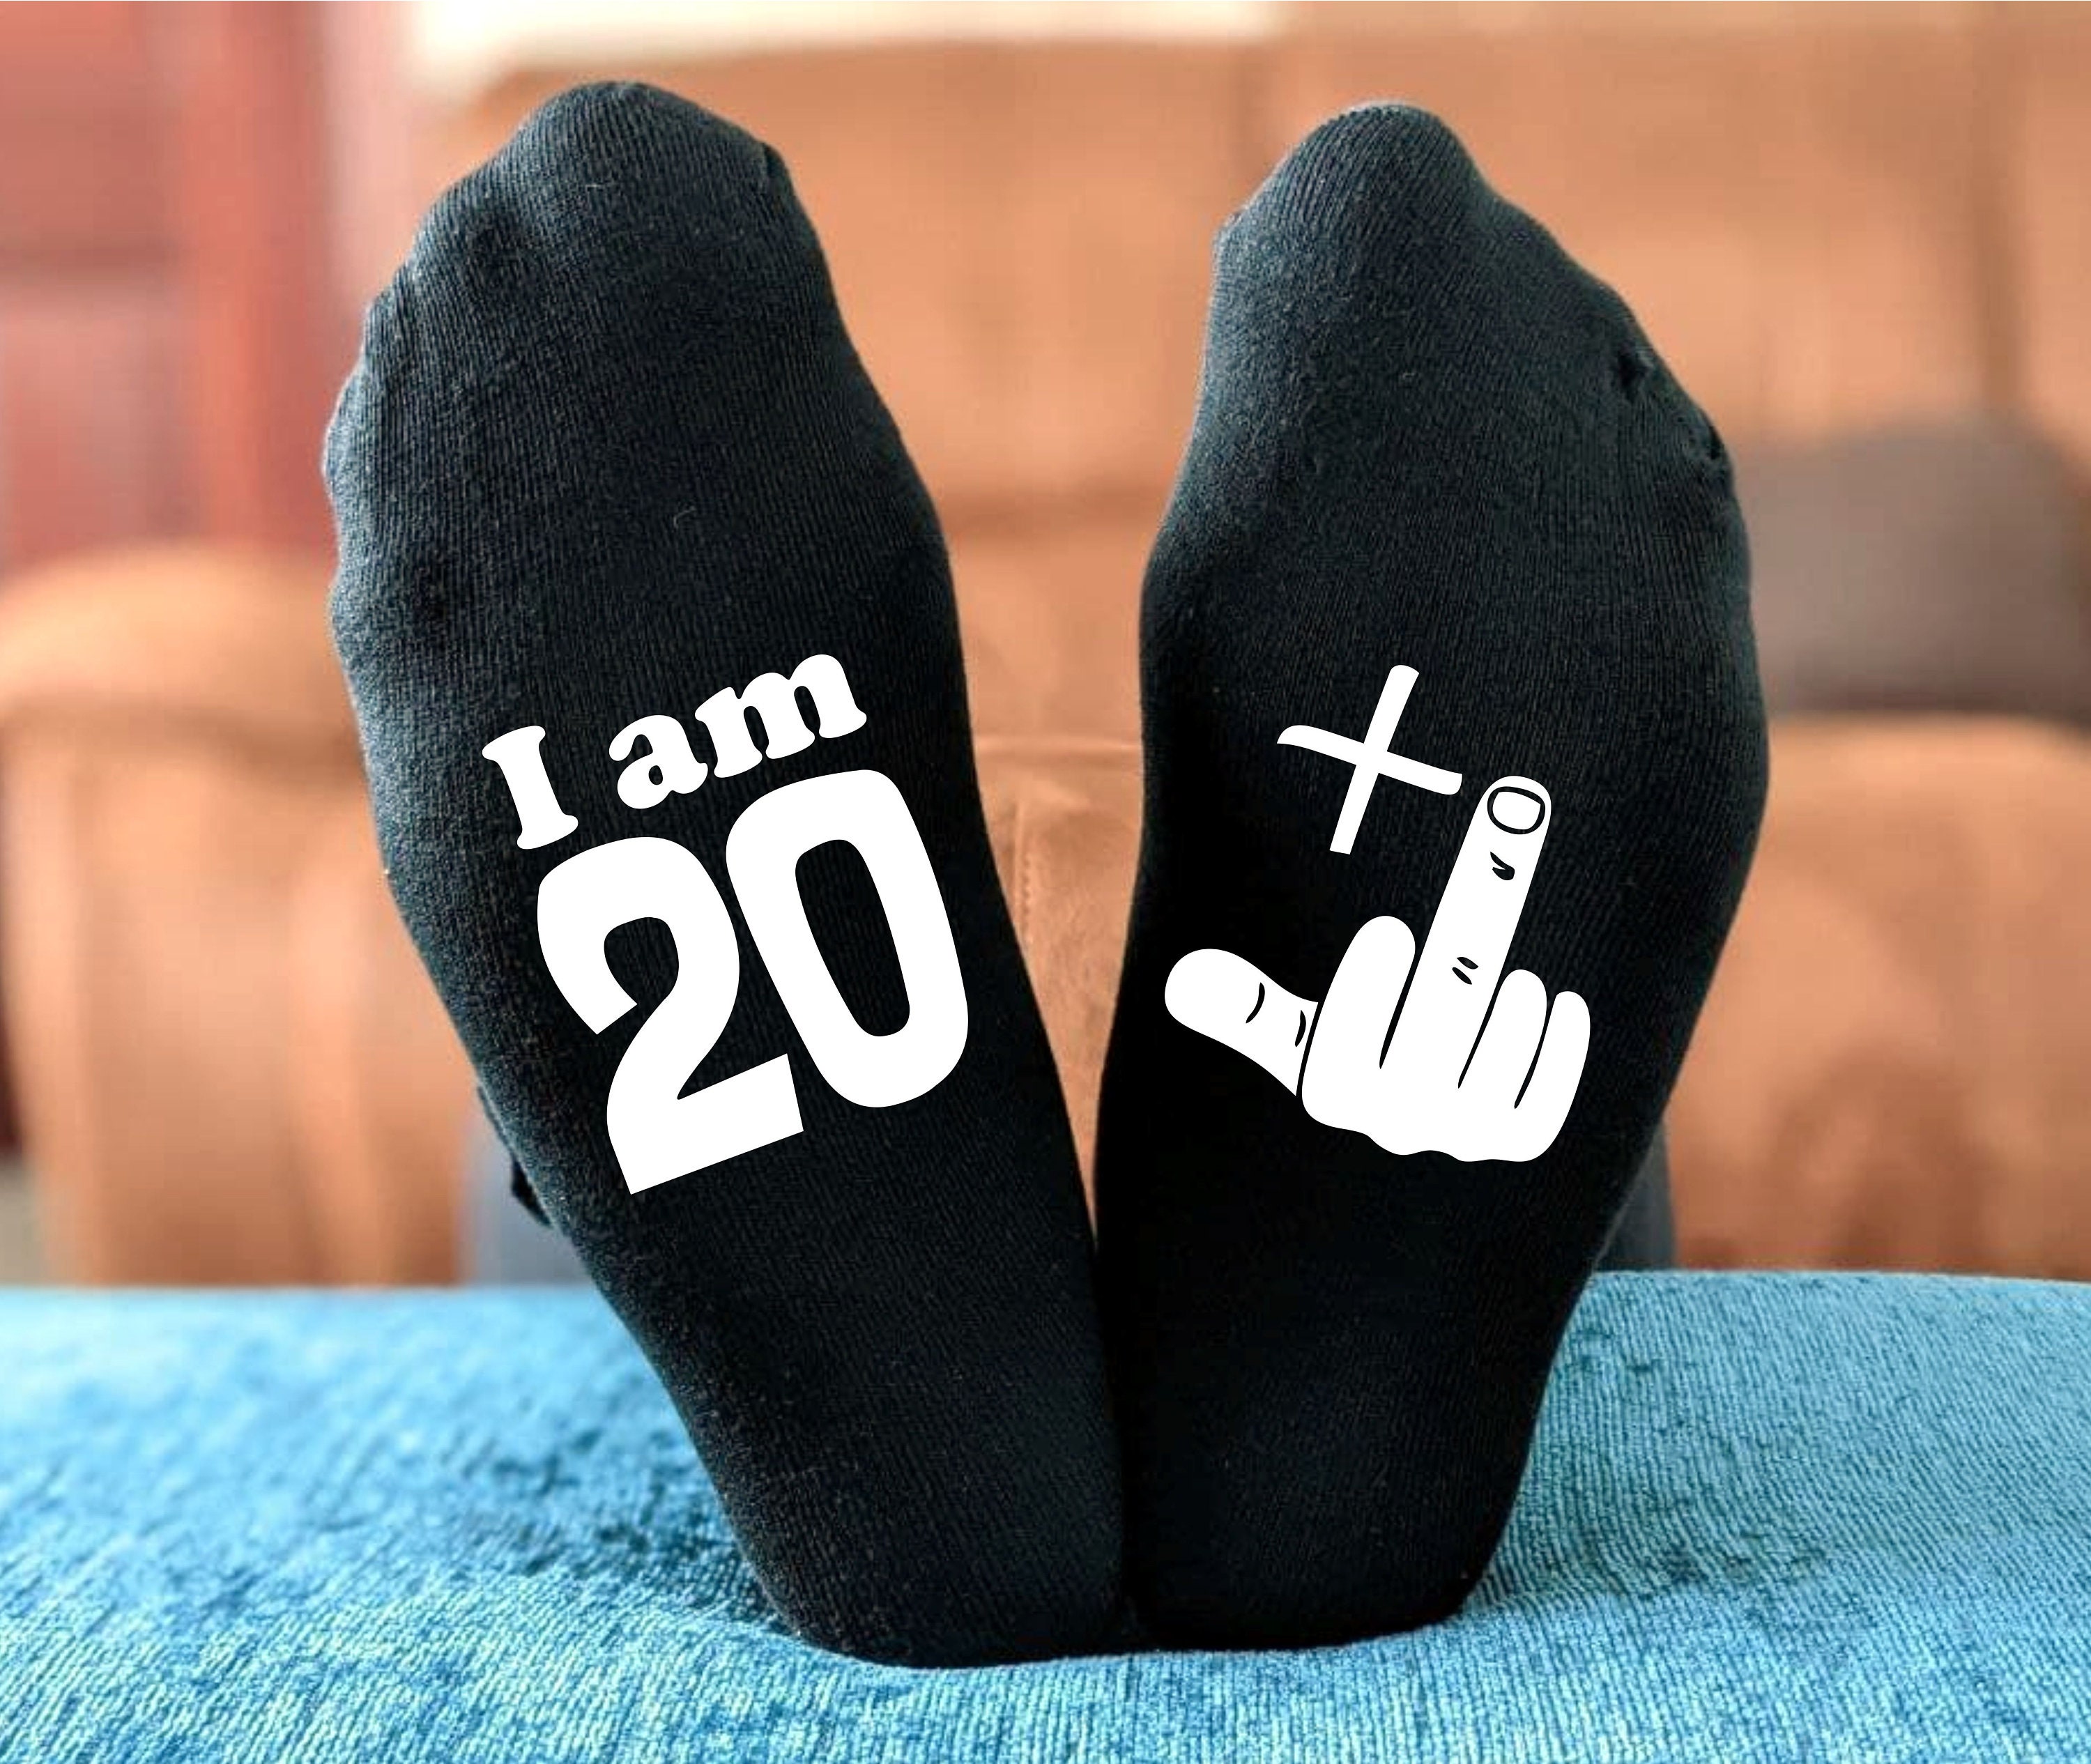 Unique 21th Birthday Gifts for Men Women, Crazy Silly 21st Birthday Socks, Funny Gift Idea for Unisex Adult 21-Year-Old